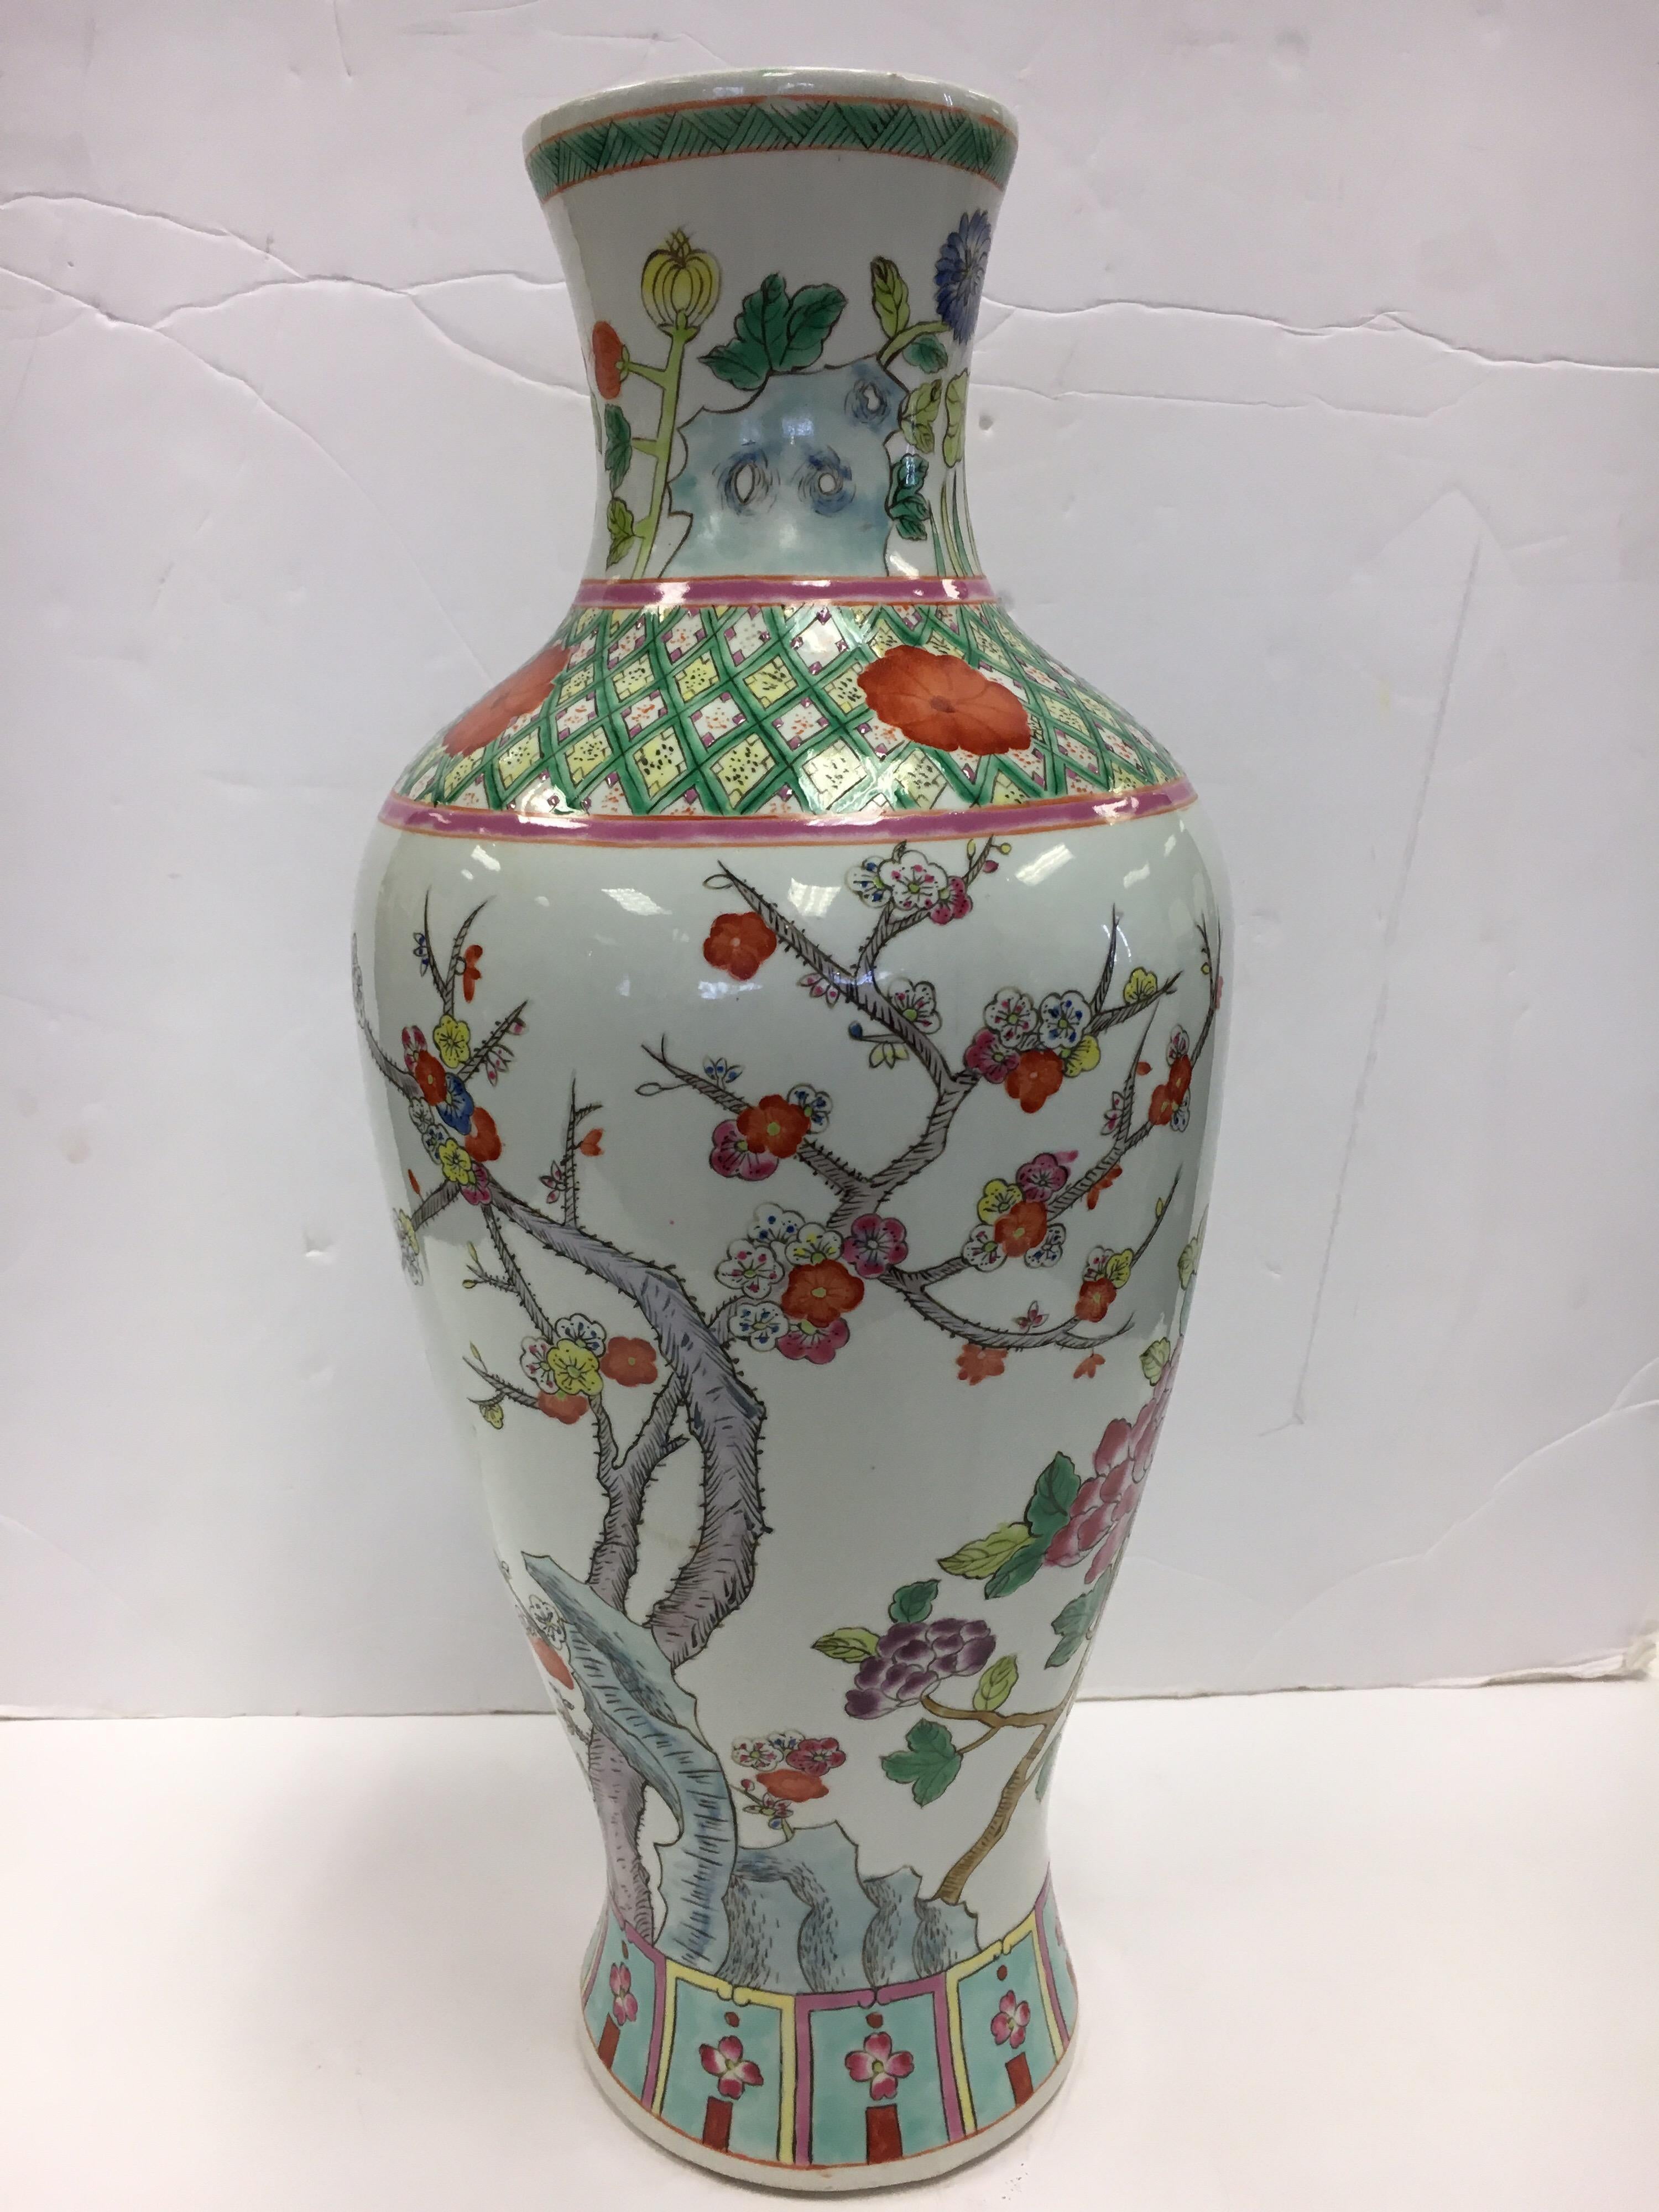 Stunning Chinese baluster form vintage vase with hand painted flowers, trees and branches.
The colors are vivid and vibrant.